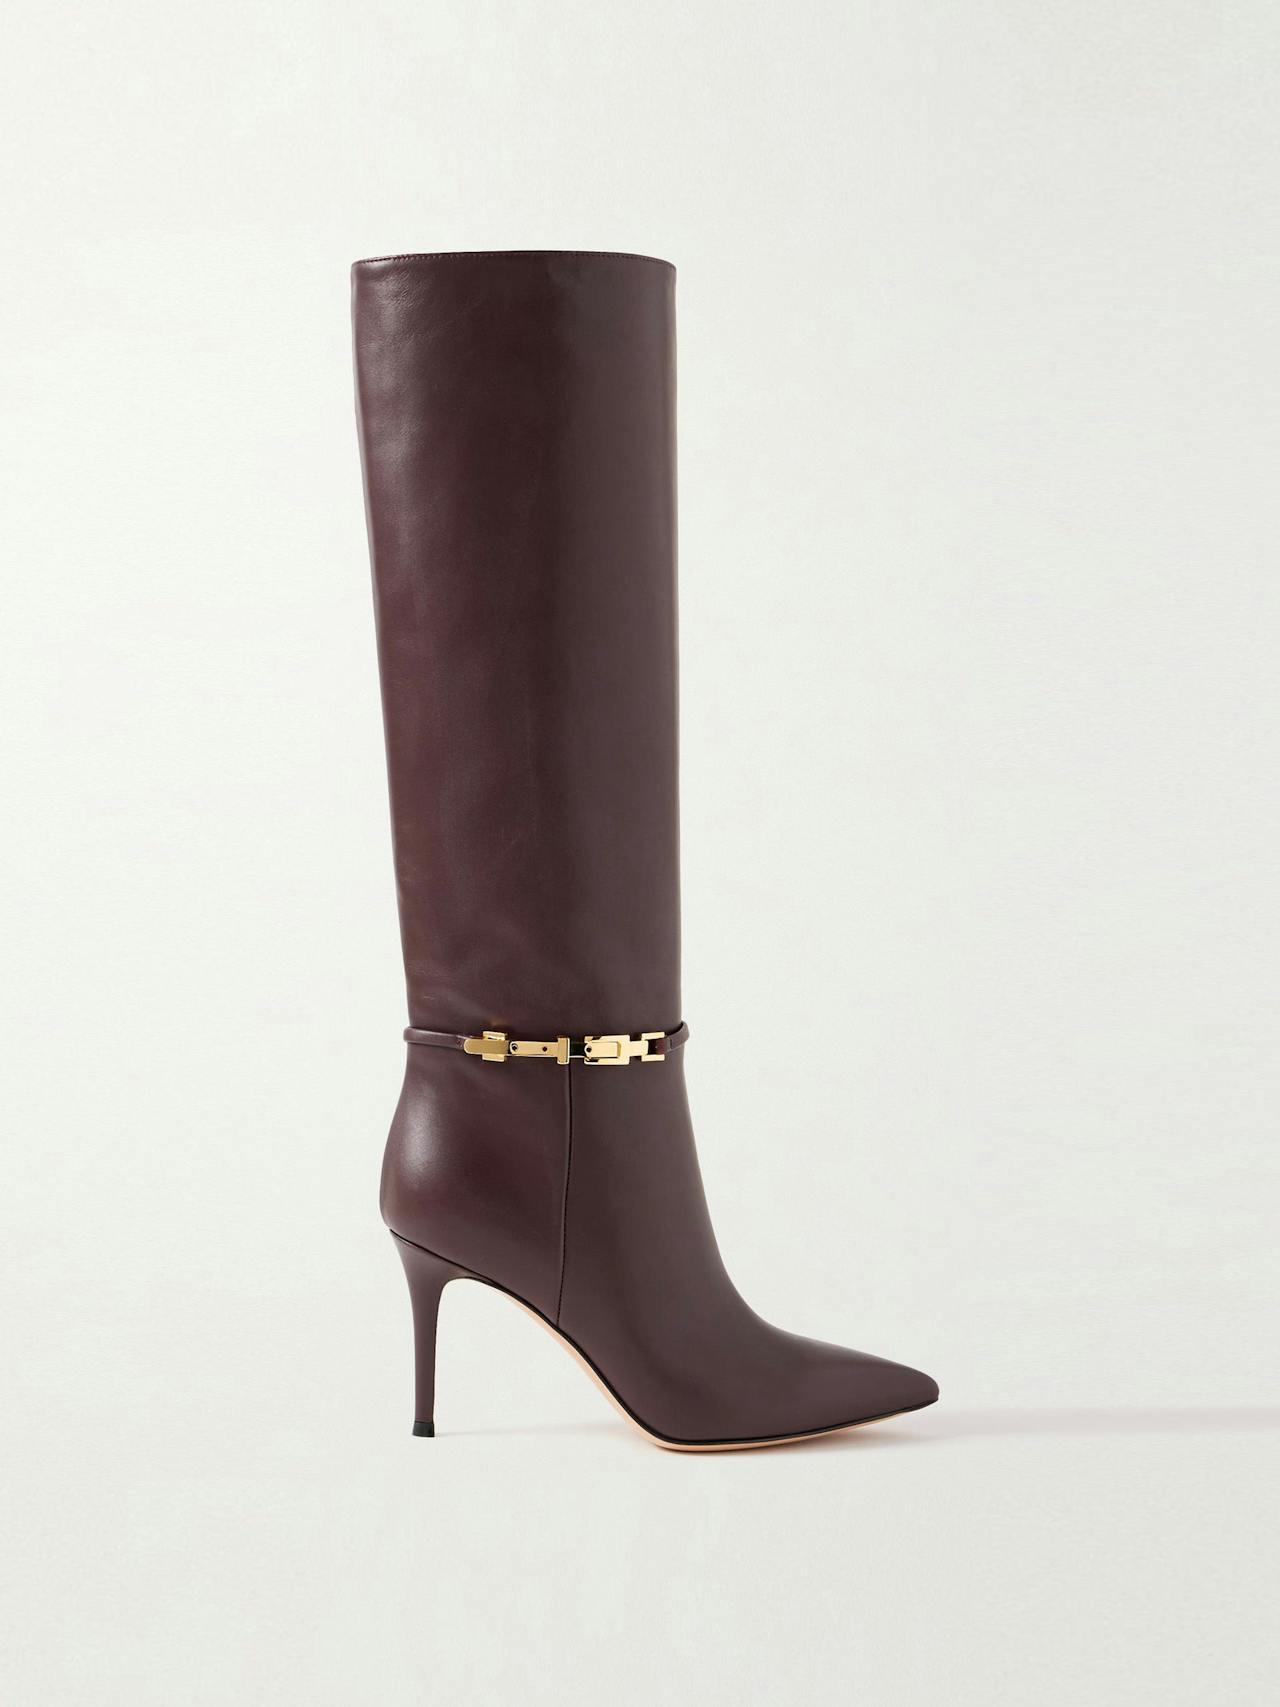 Glove 85 embellished leather knee boots in Burgundy